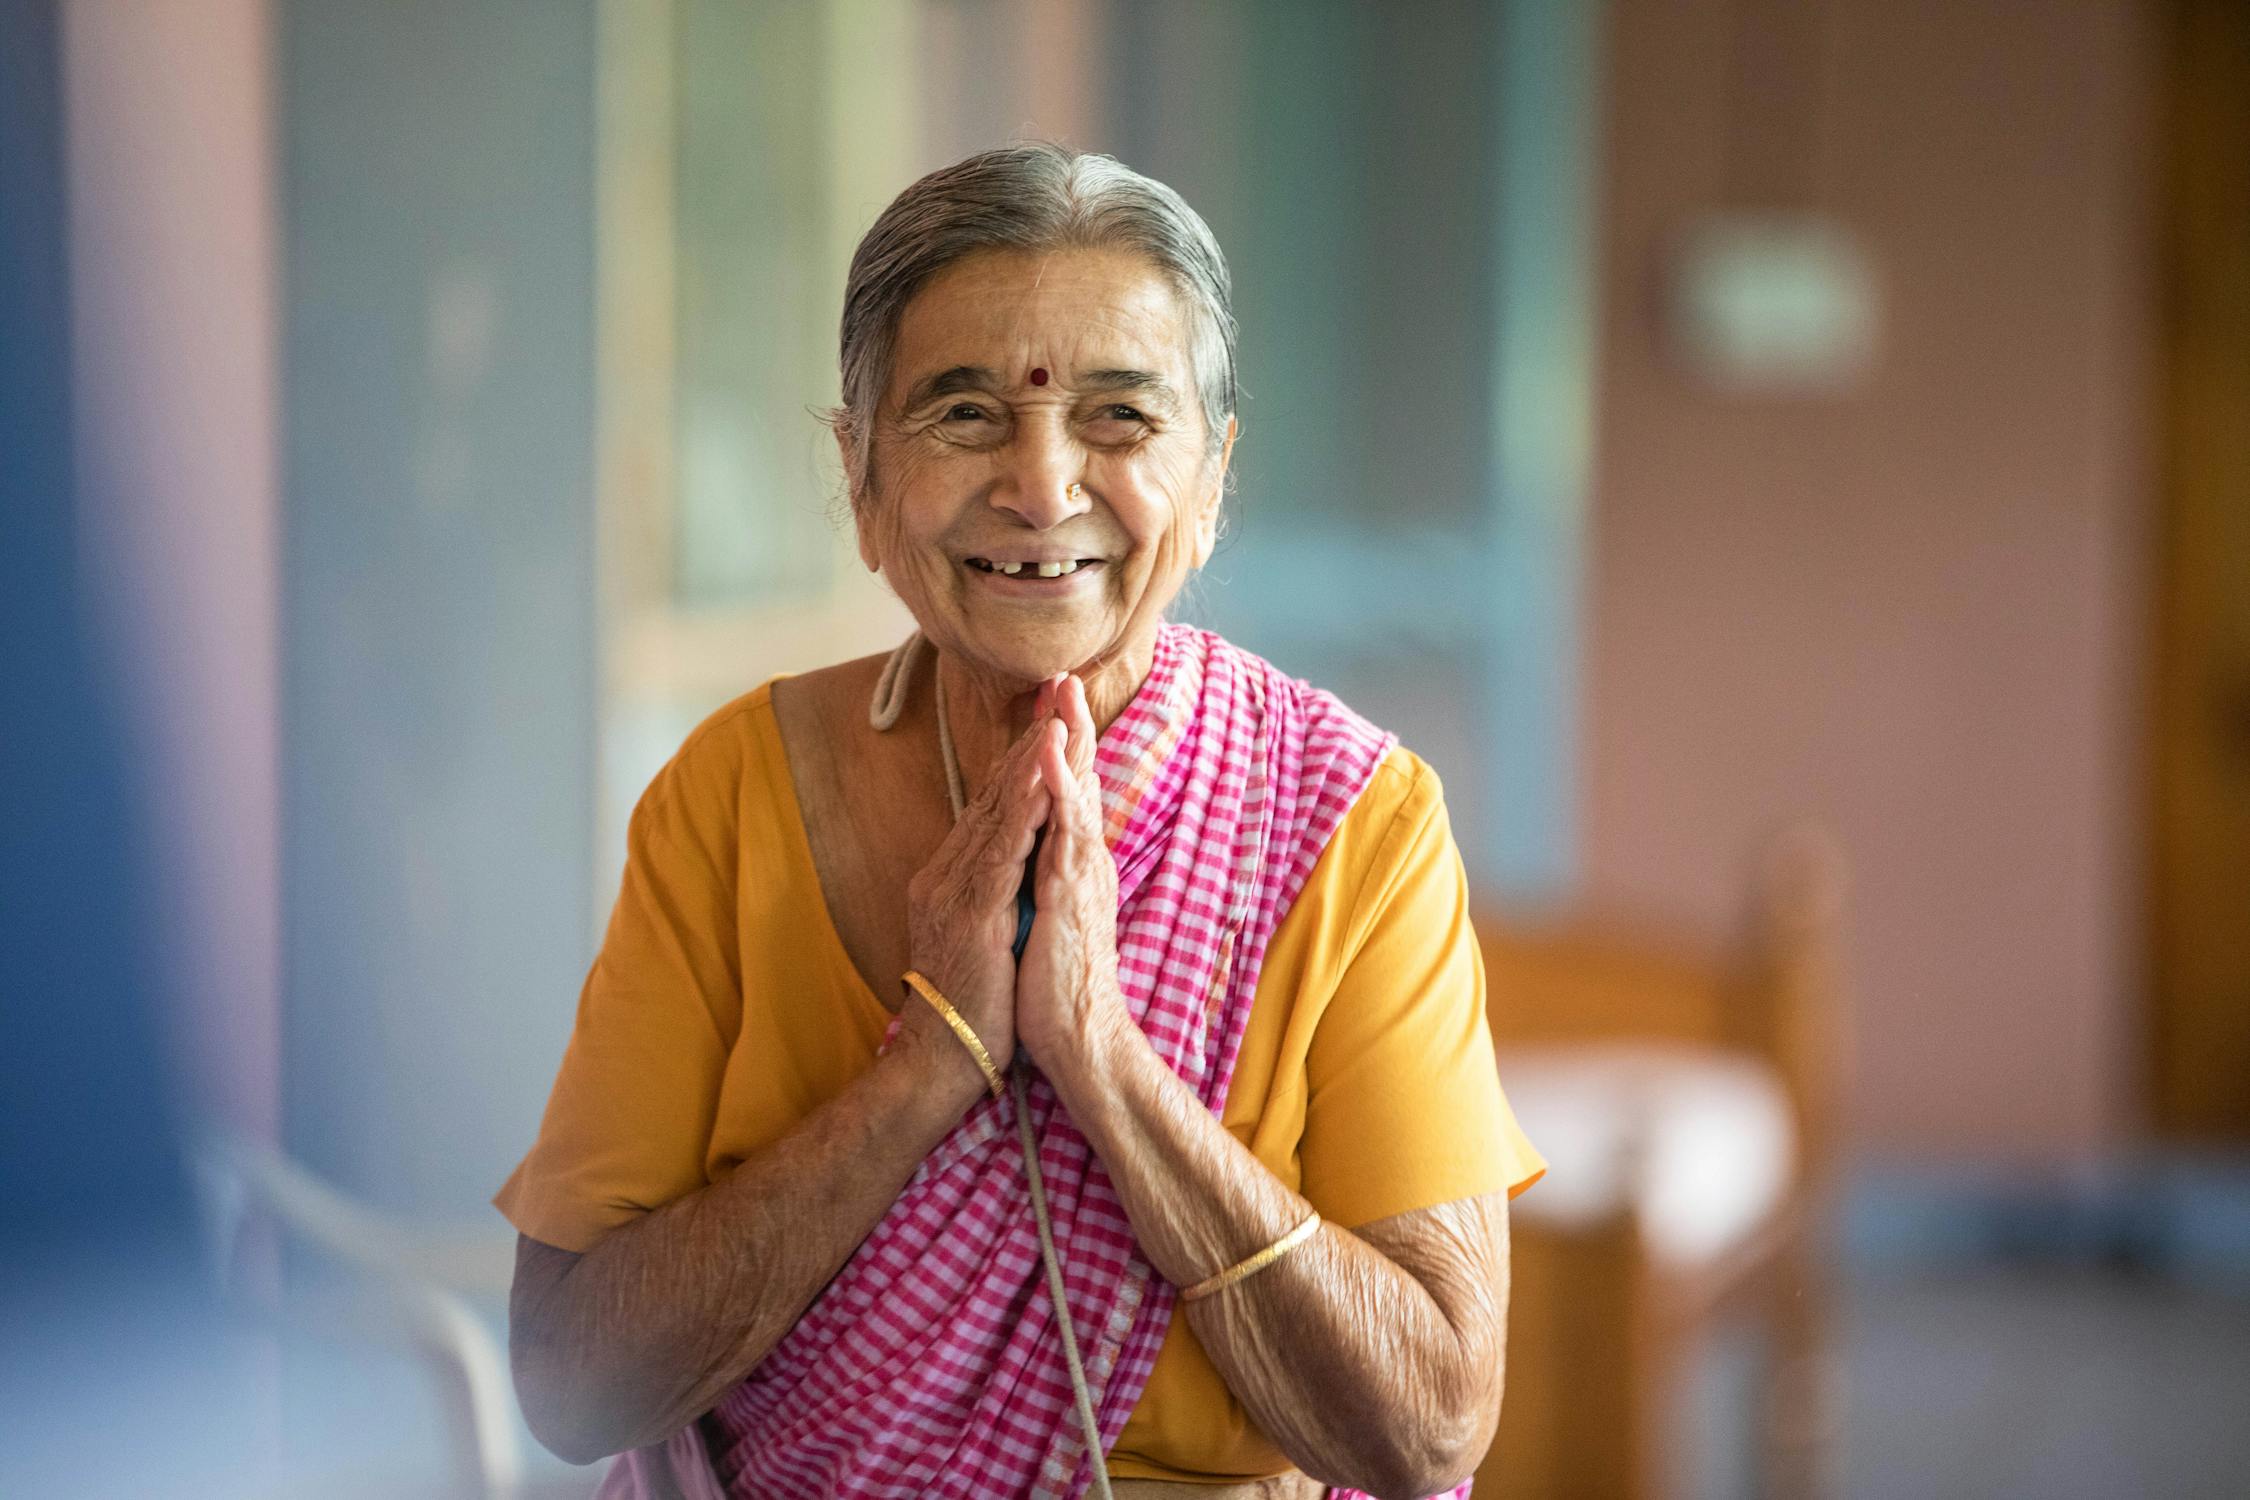 Senior Citizen Photo by Anil Sharma from Pexels: https://www.pexels.com/photo/an-elderly-woman-in-yellow-shirt-smiling-10597154/